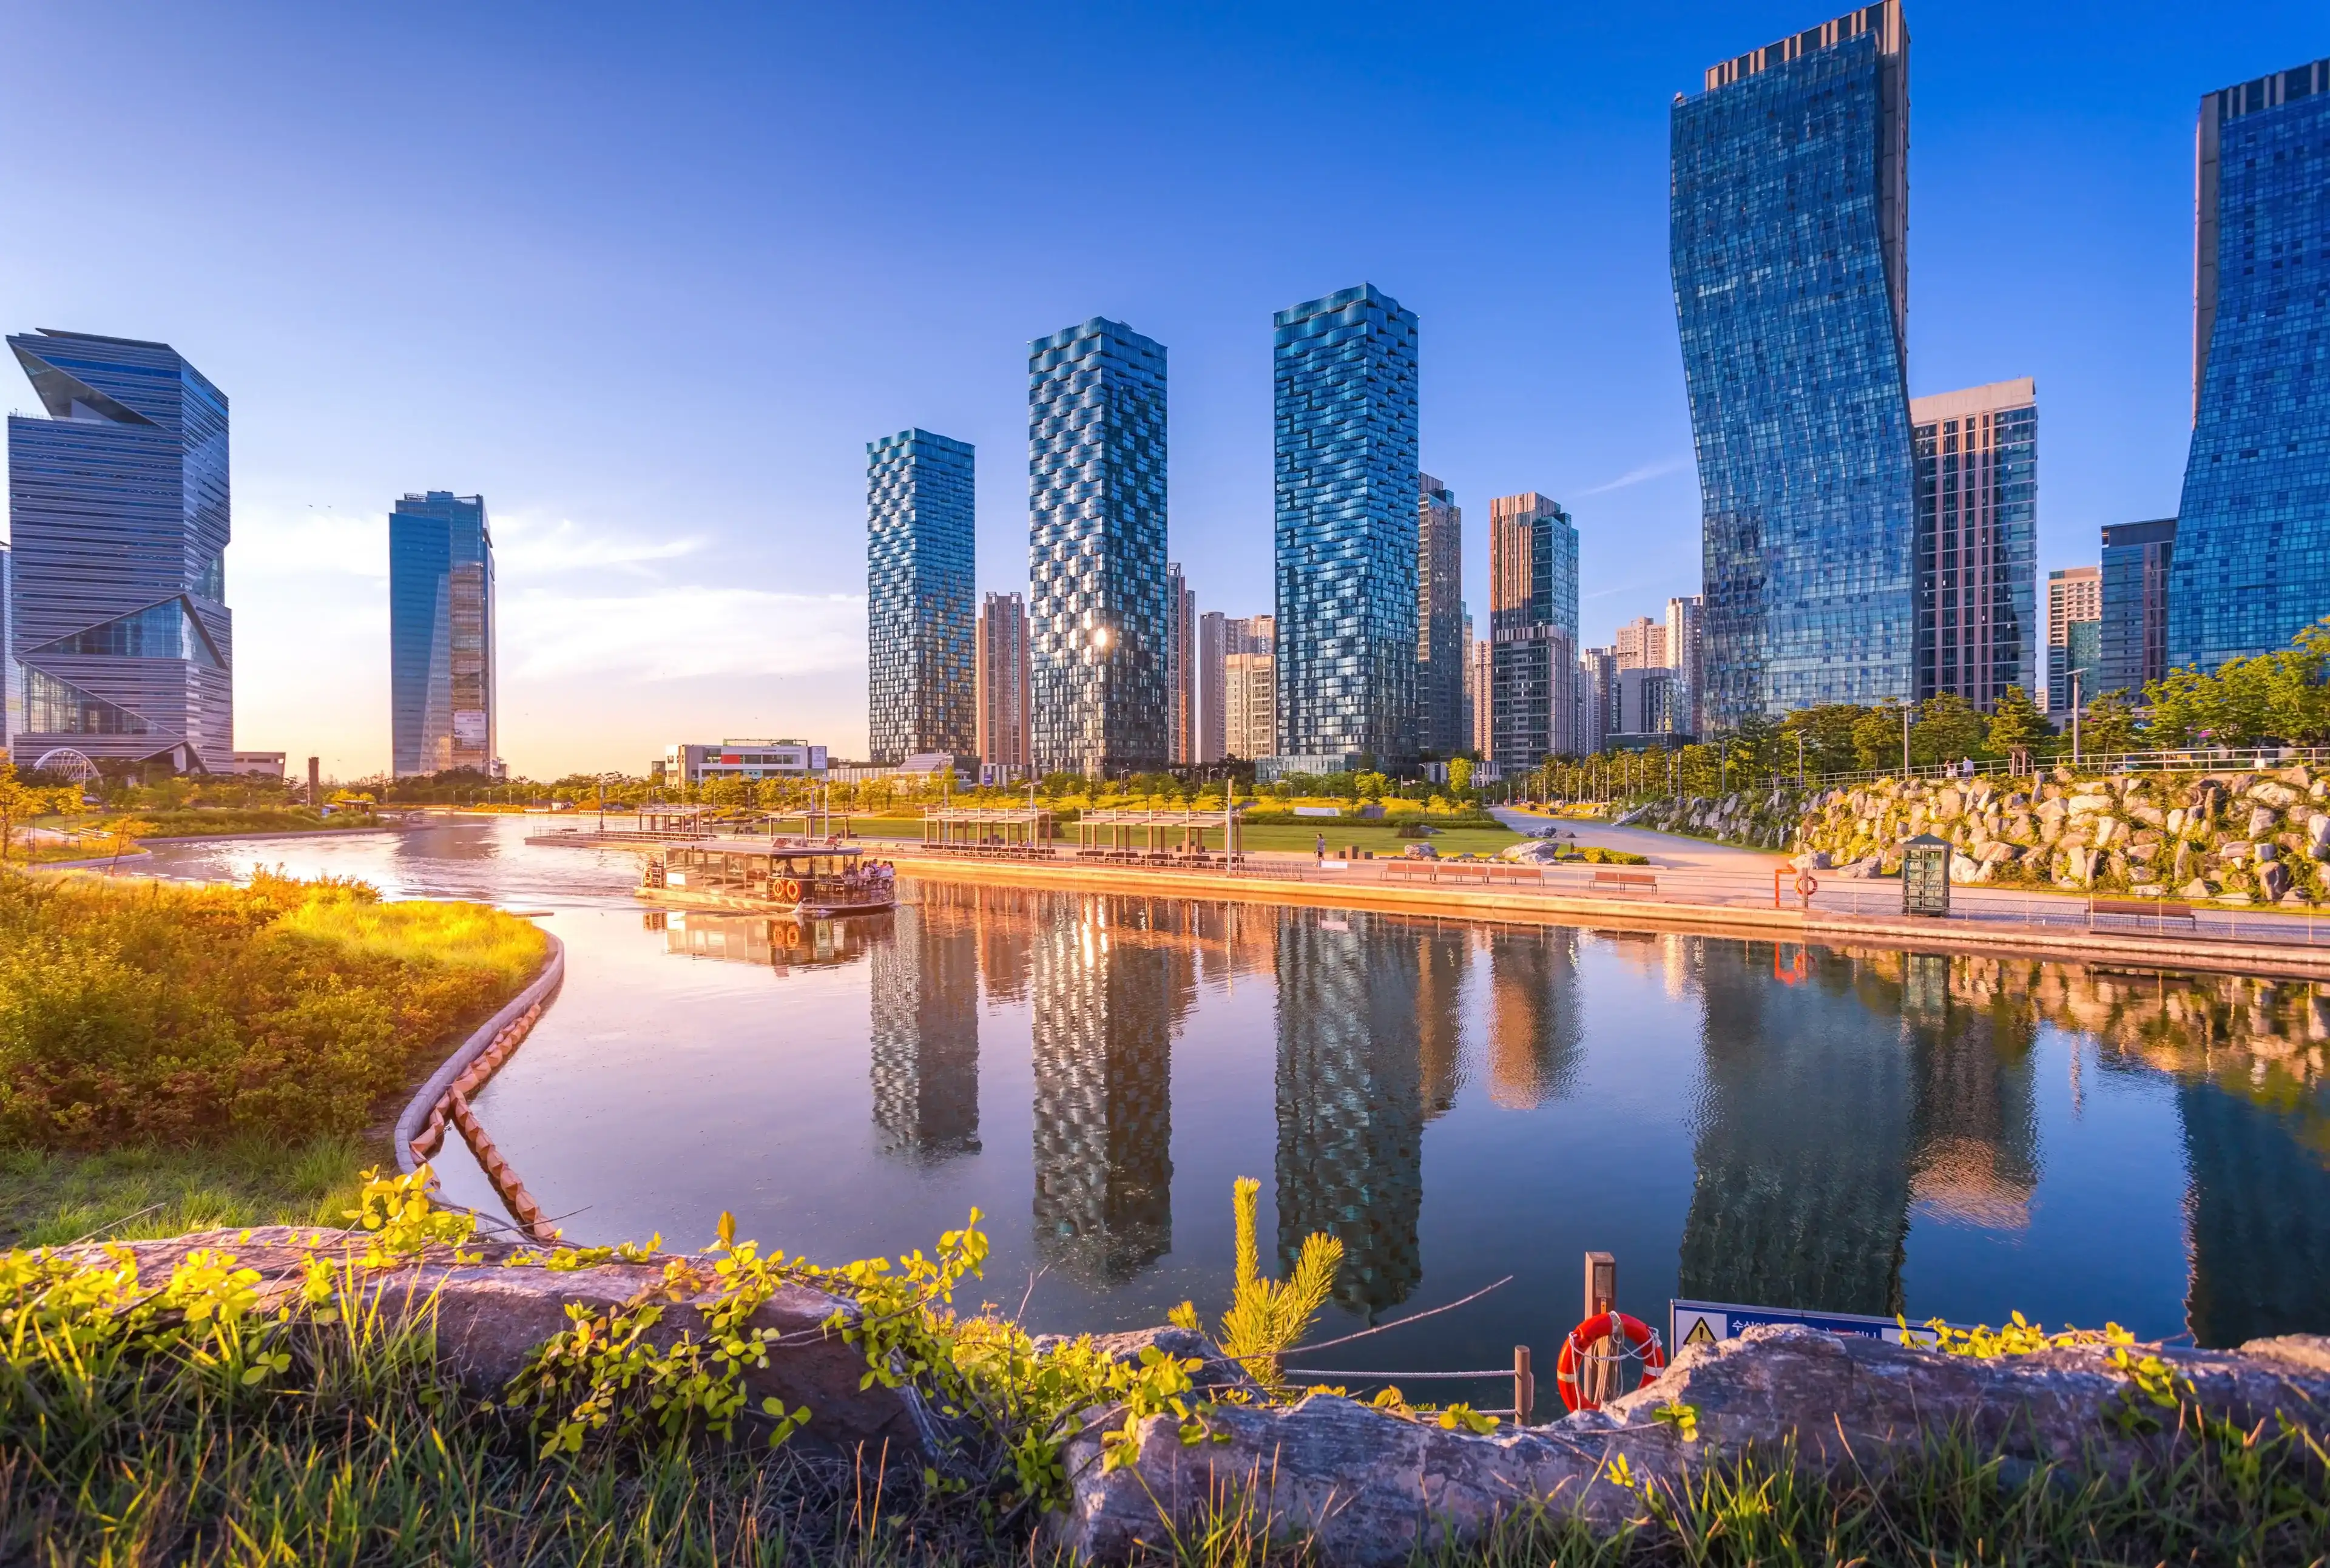 Seoul city with Beautiful after sunset, Central park in Songdo International Business District, Incheon South Korea.